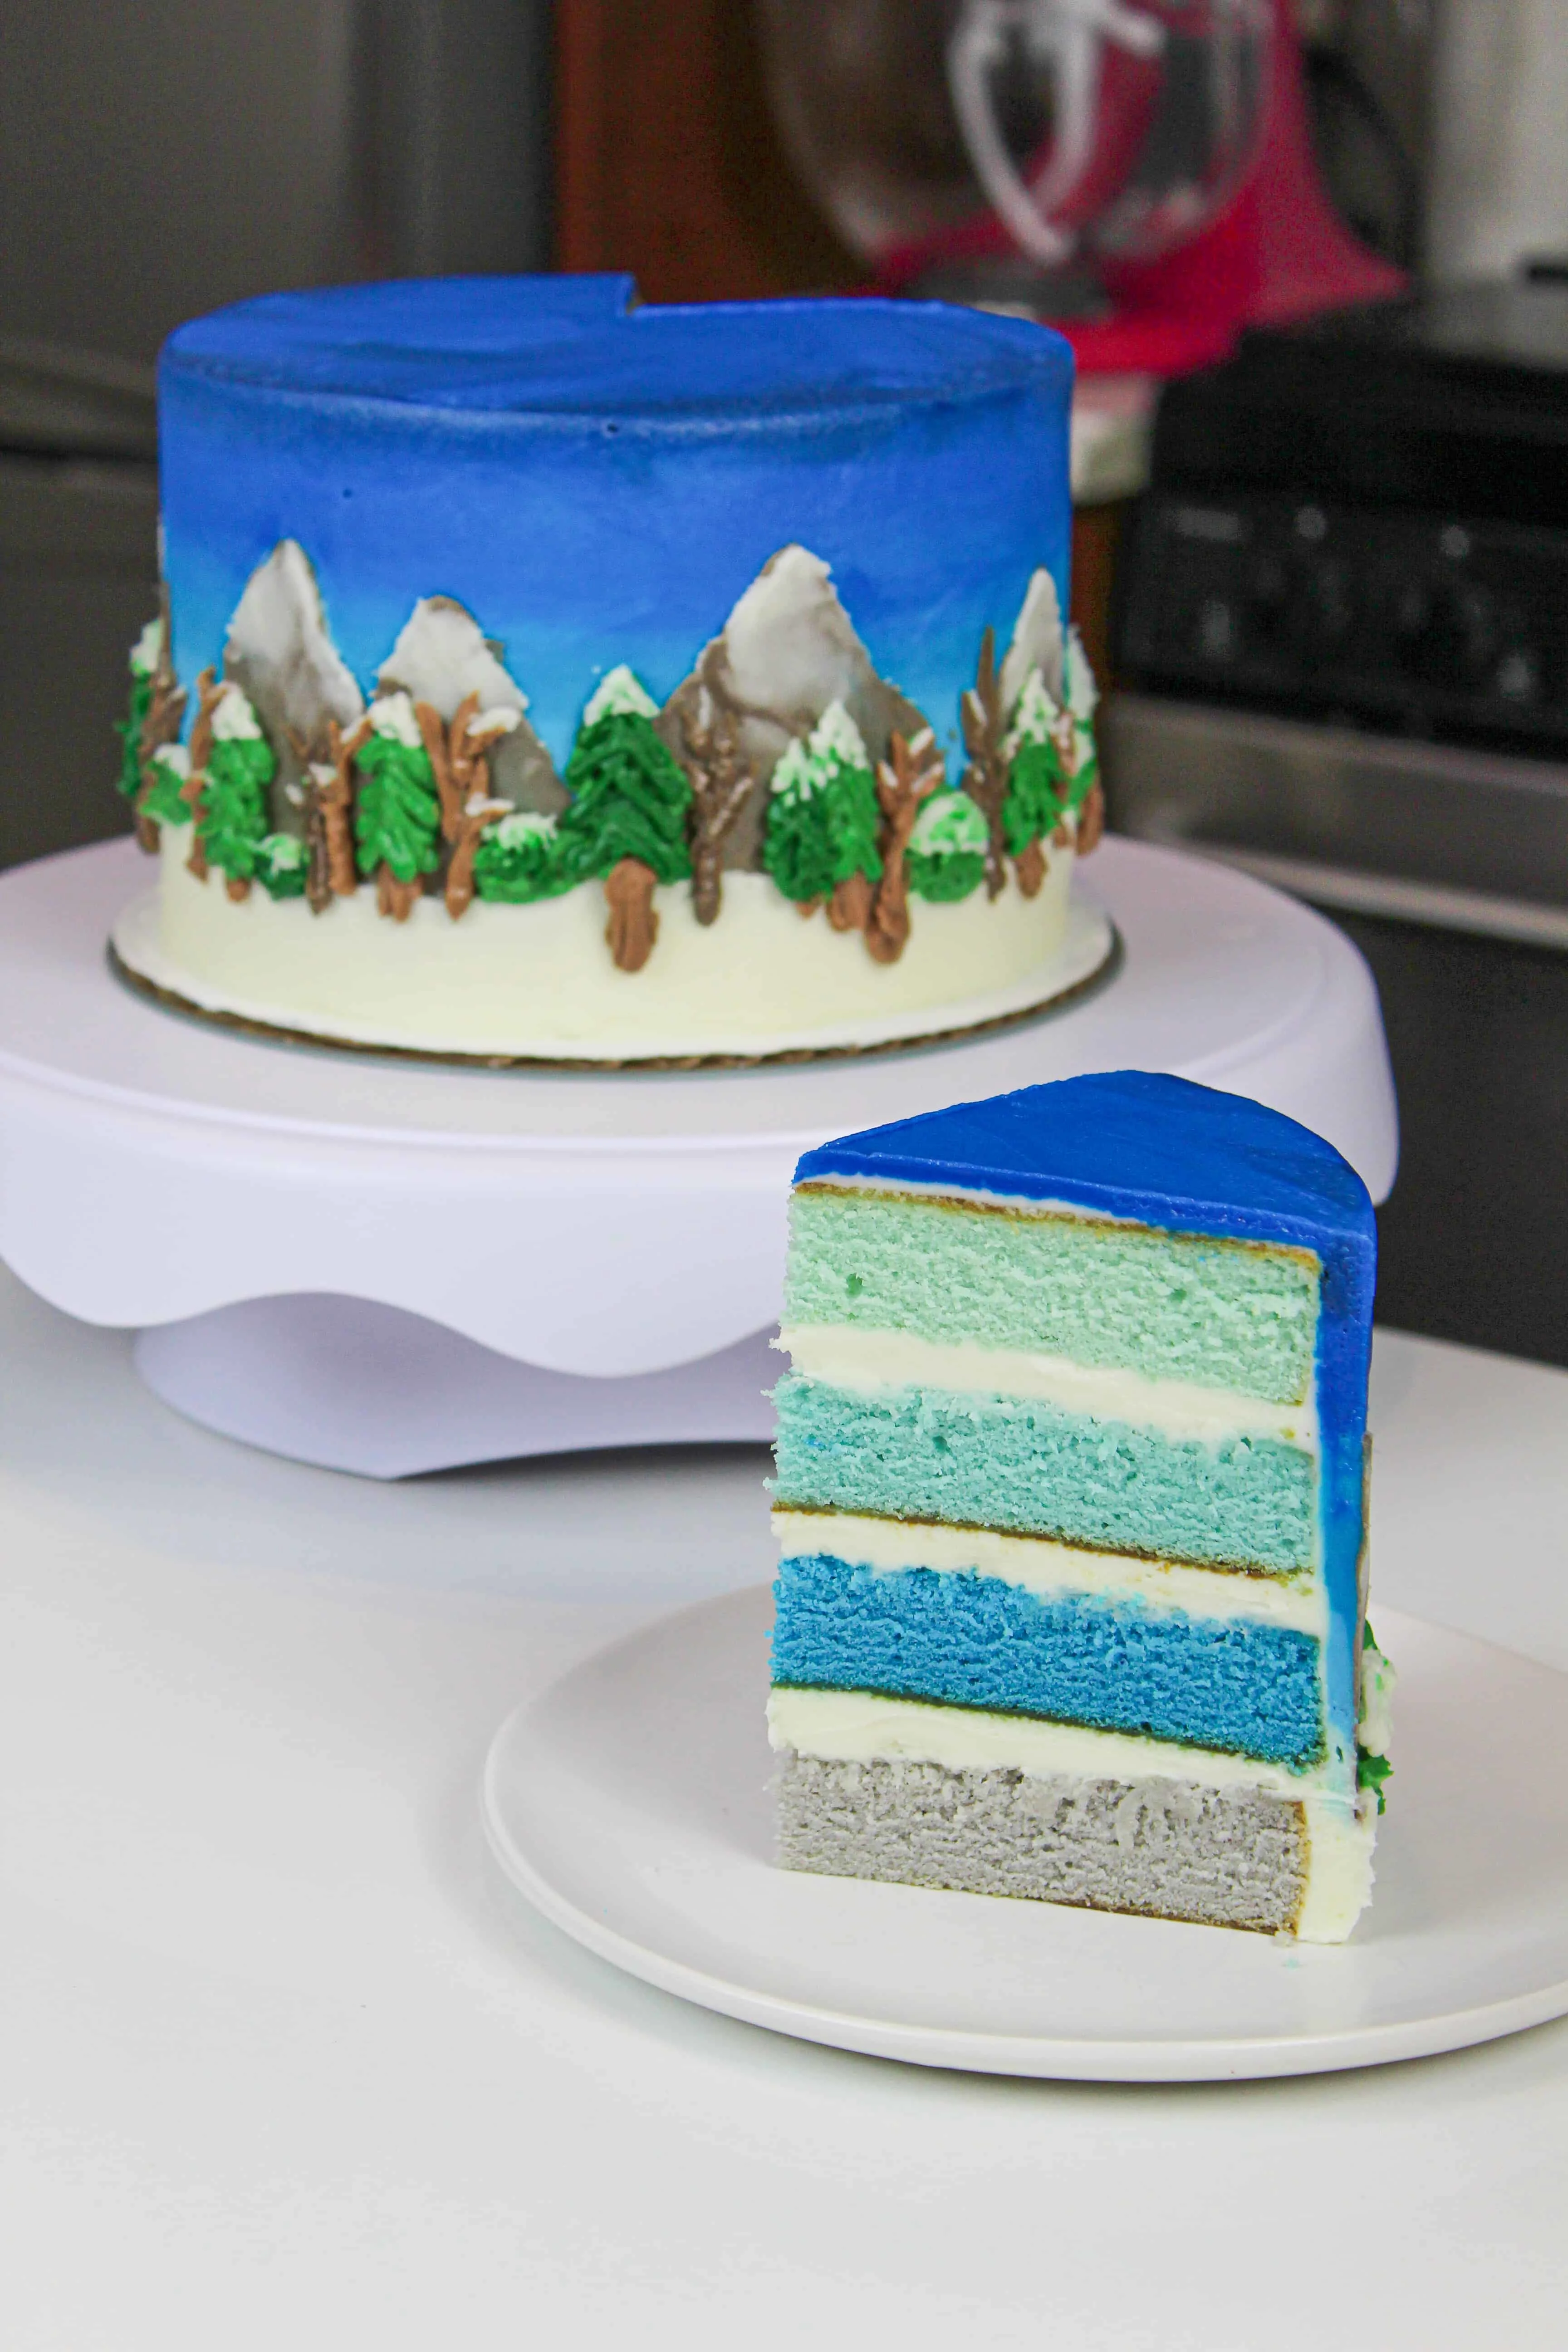 The Best Winter Cakes for Any Holiday Party - Cake by Courtney